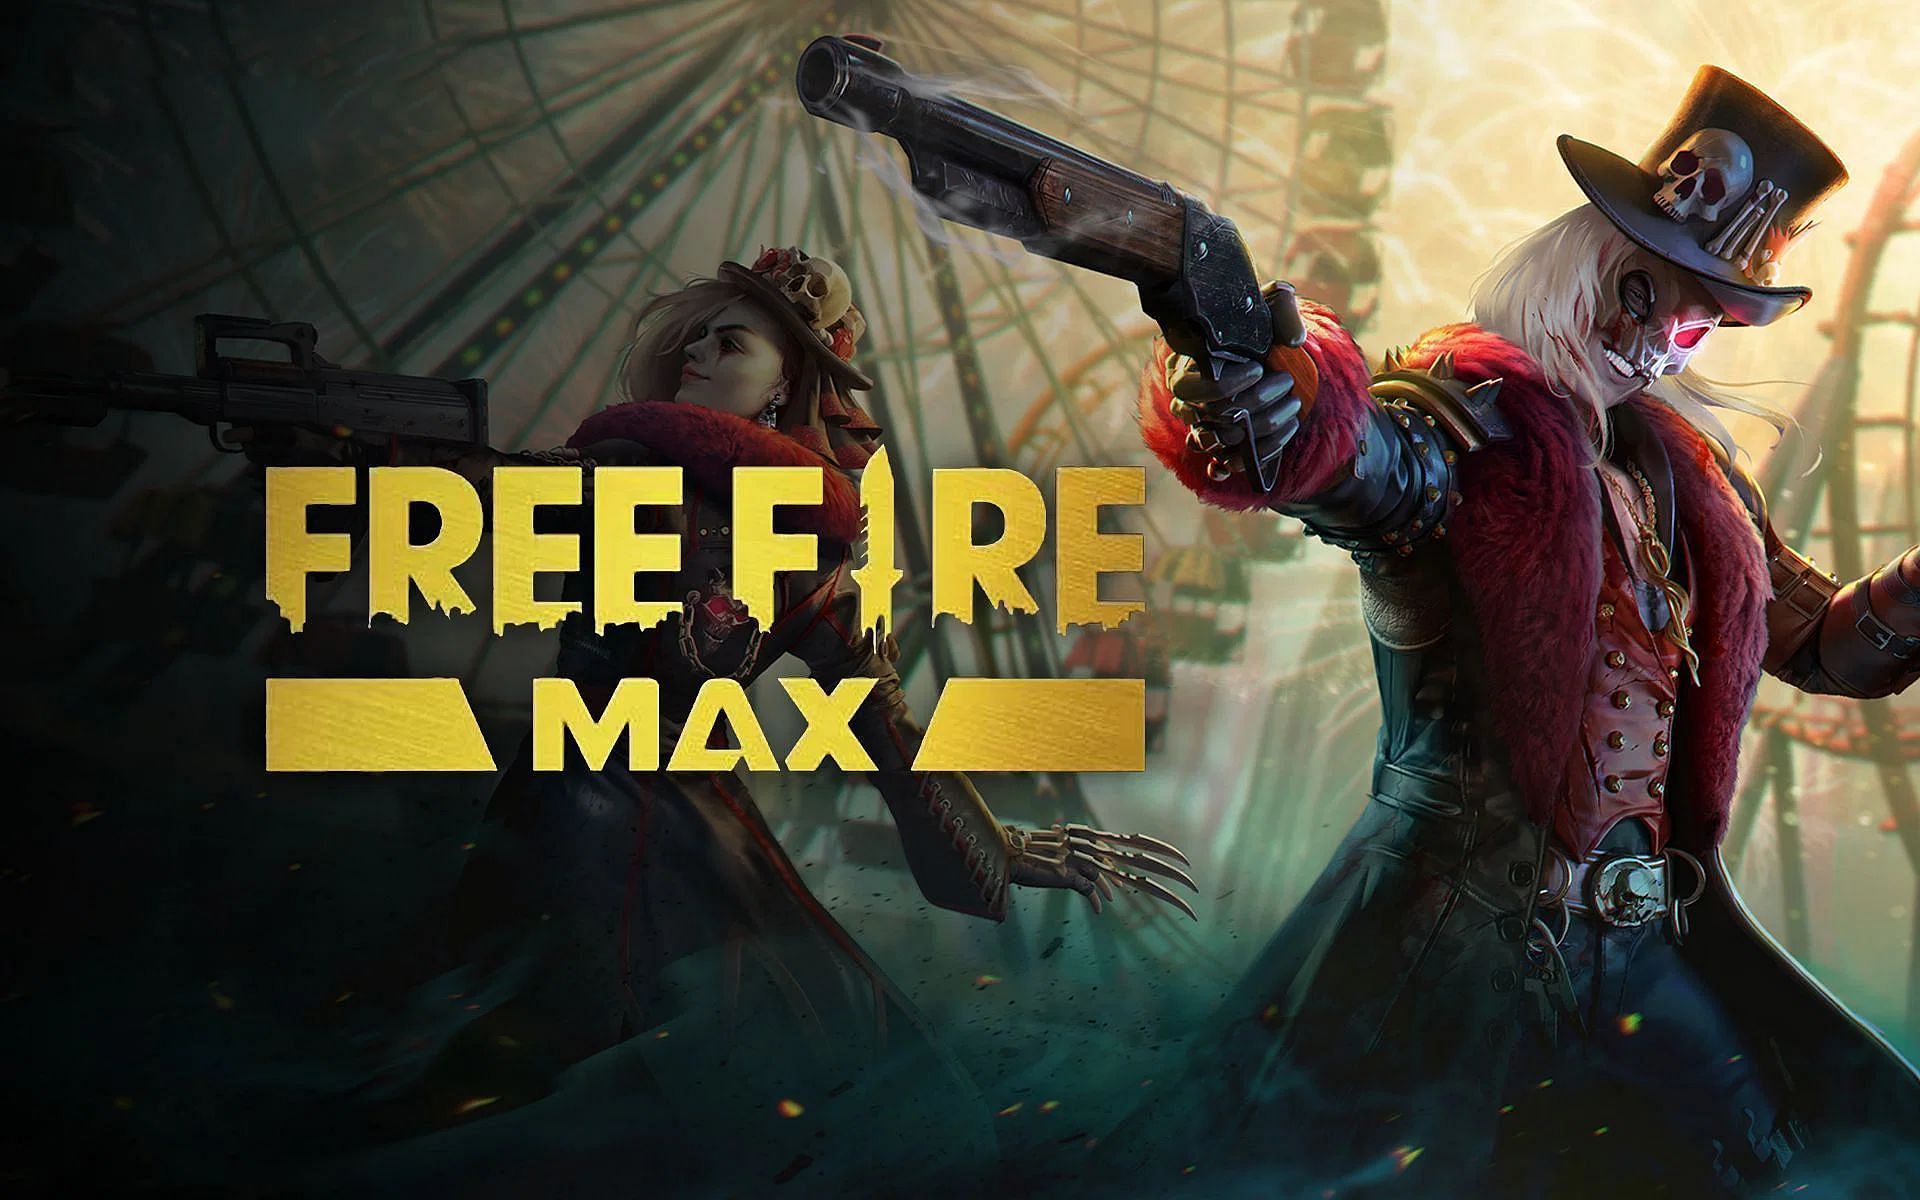 6 best games like Free Fire MAX for Indian users (2022)